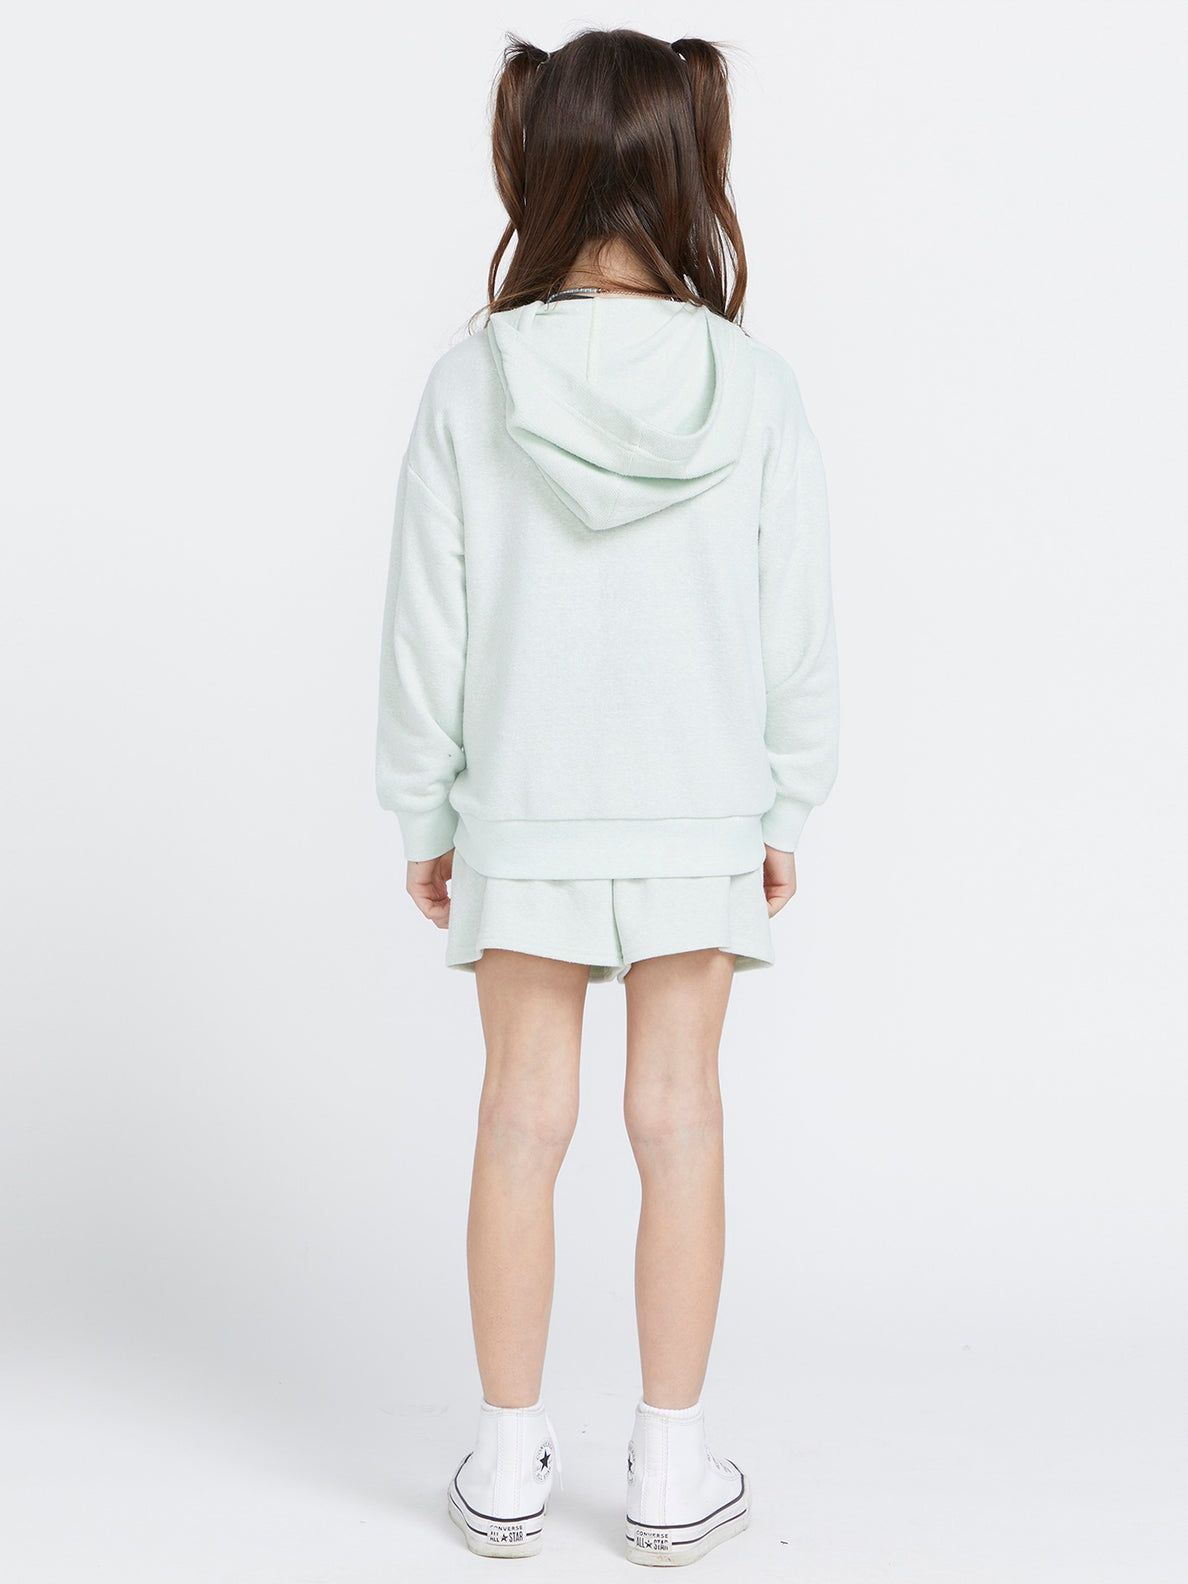 Girls Lived in Lounge Frenchie Zip Jacket - Chlorine